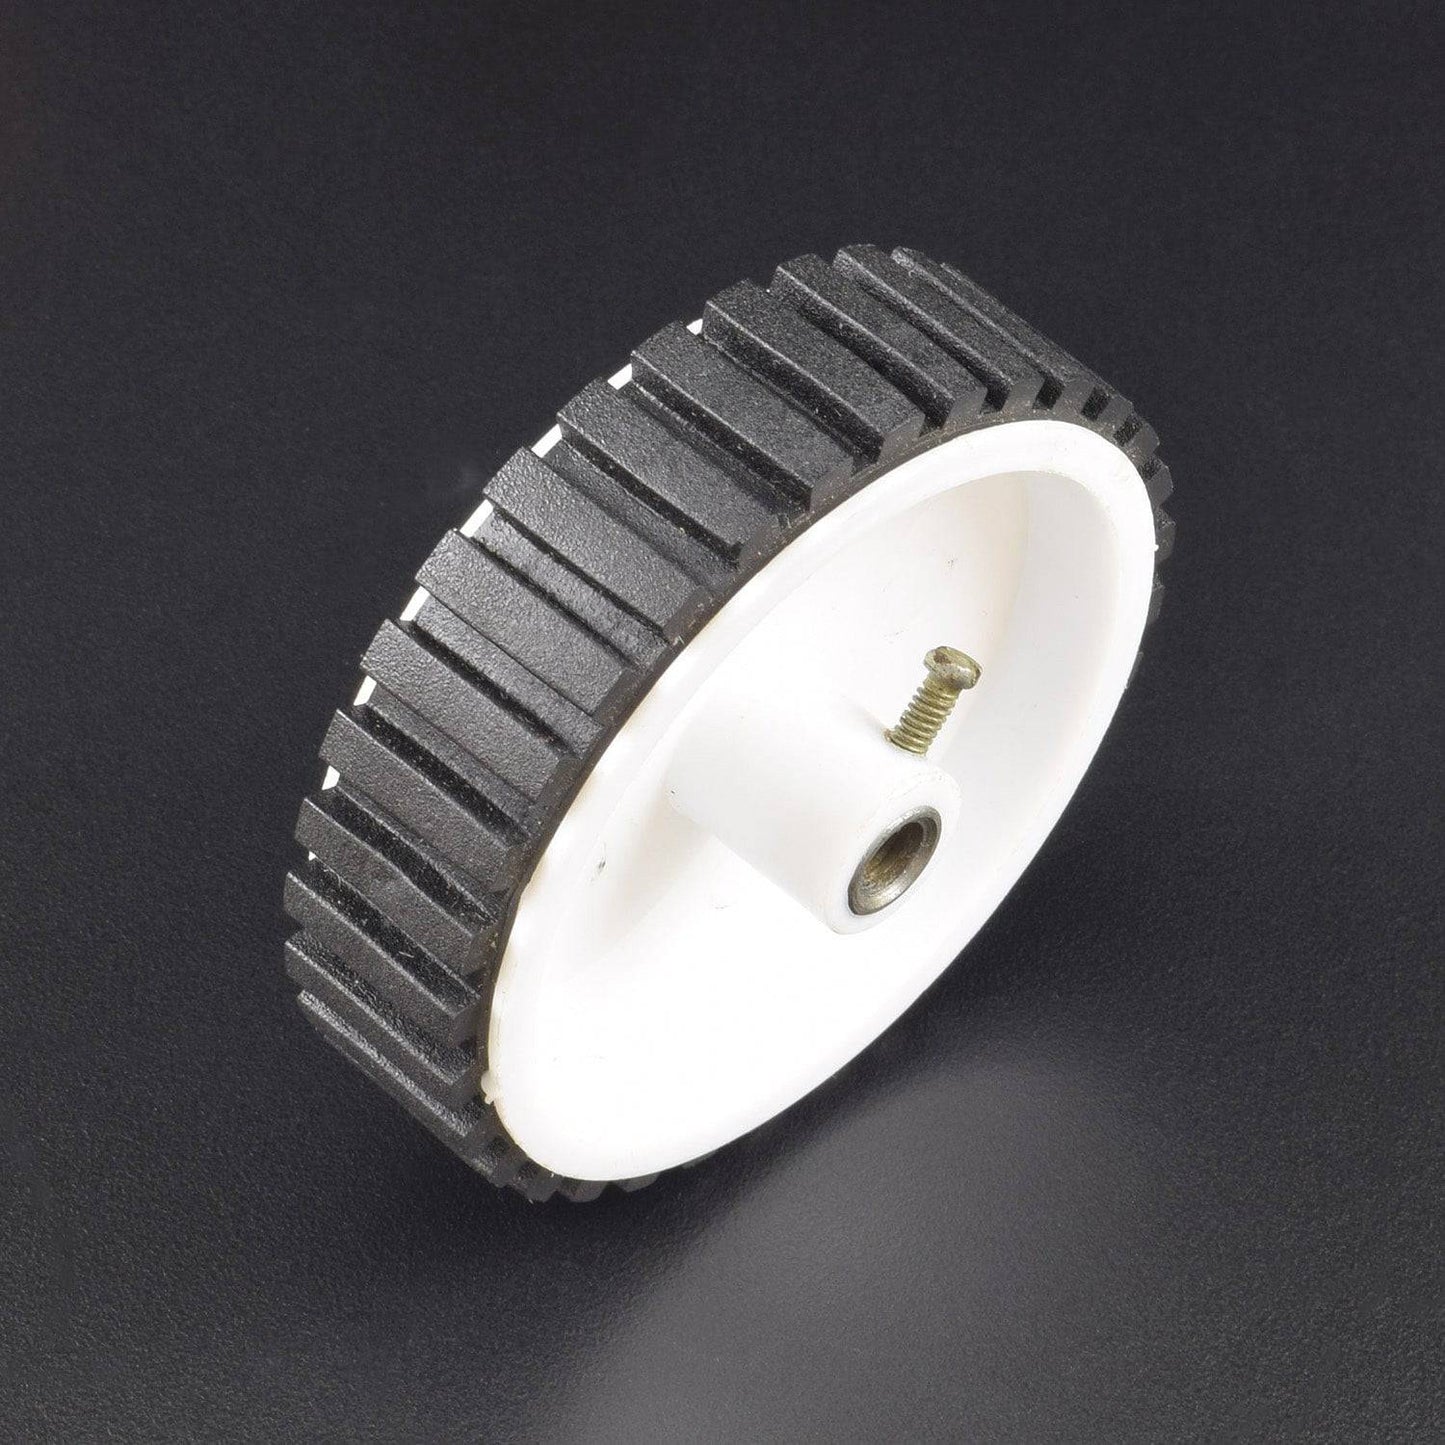 Robotic Wheel with 70mm x 20mm size suitable for 6mm shaft motors. - RK003 - REES52